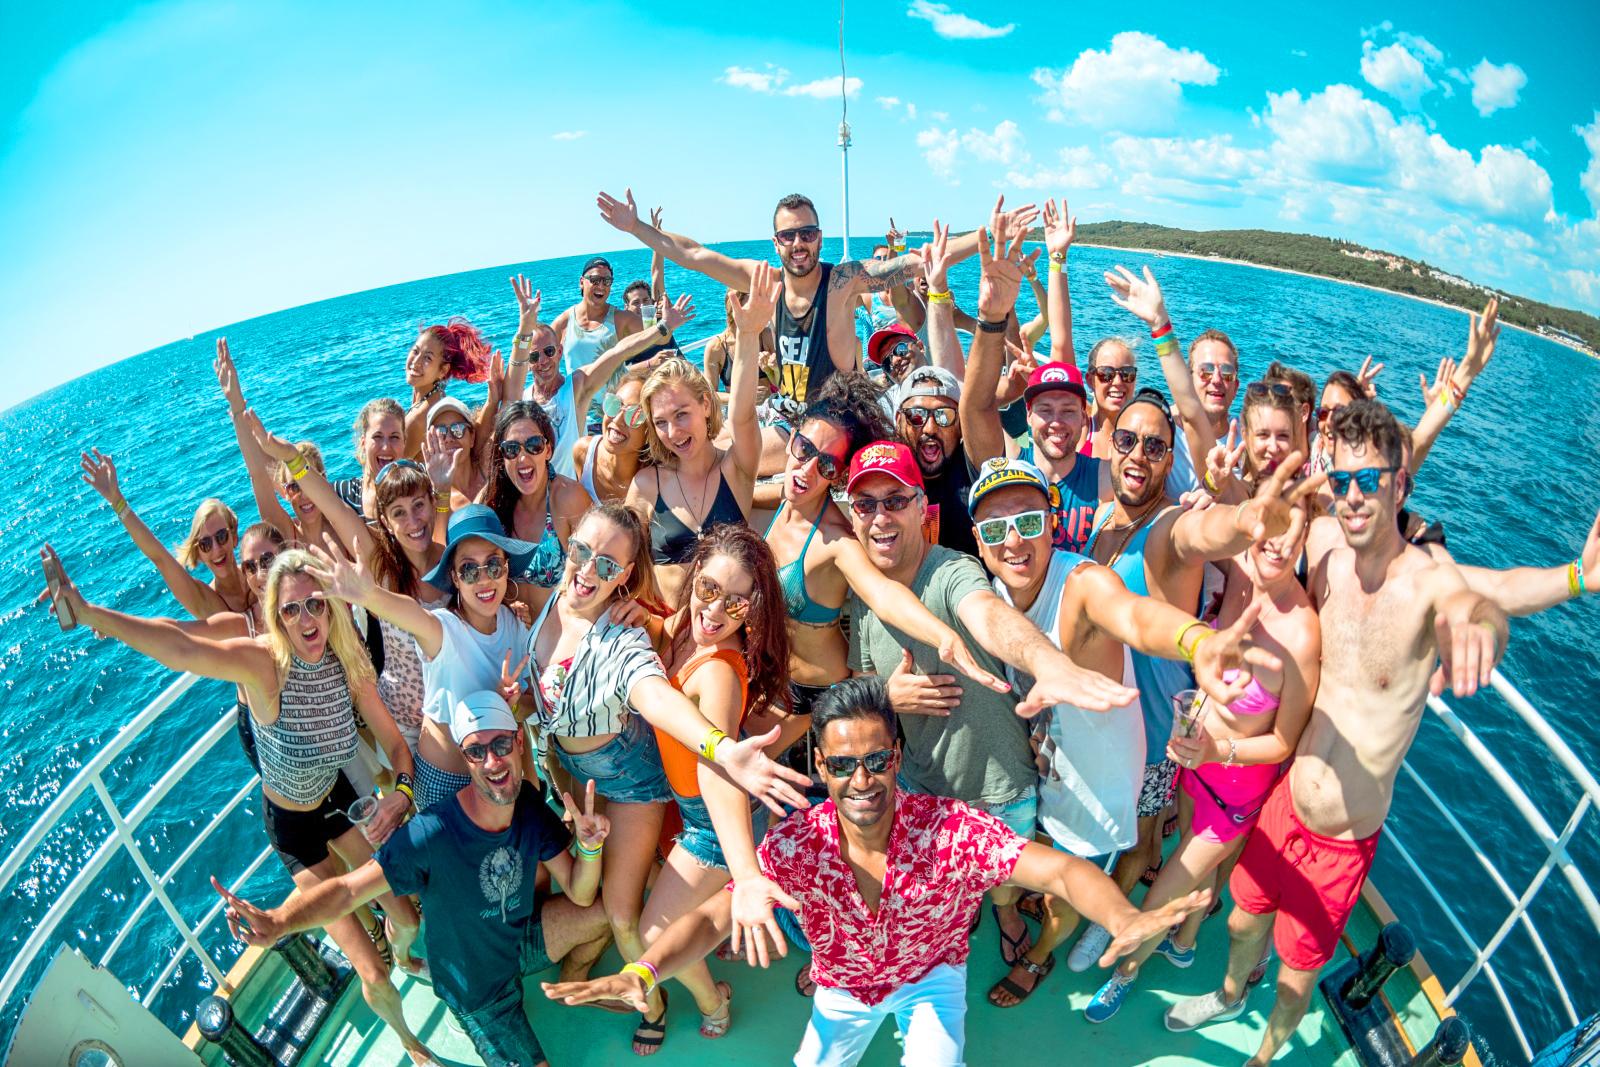 Best Boat Party – Things To Be Aware Of